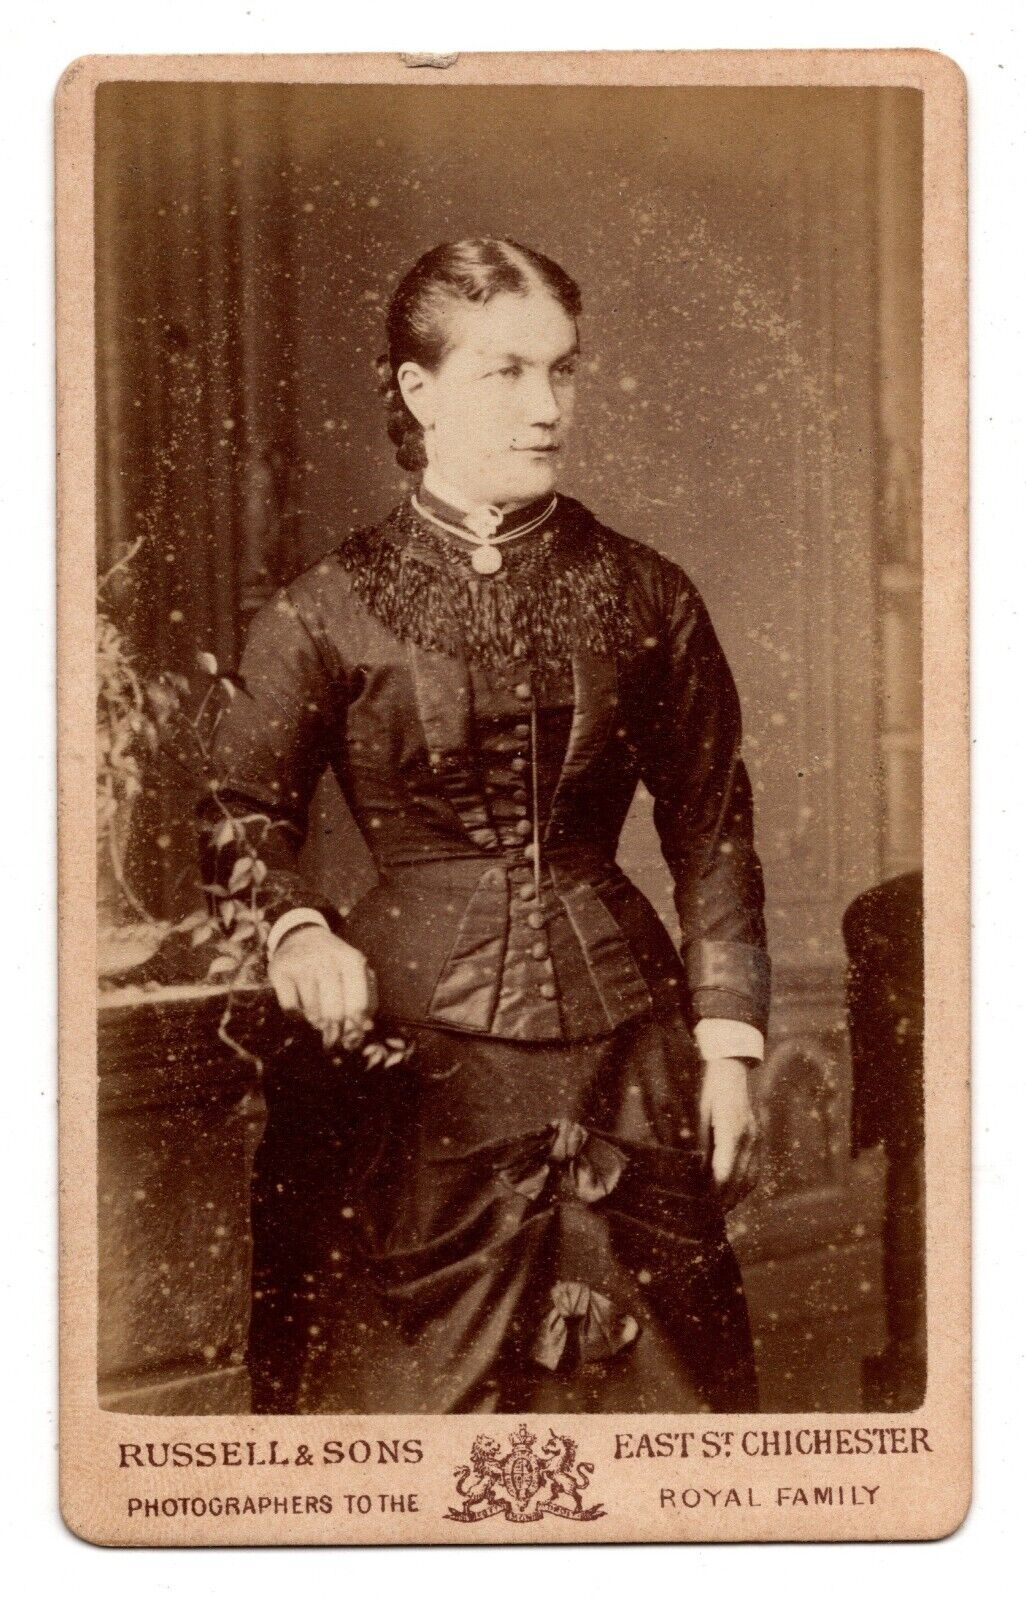 ANTIQUE CDV CIRCA 1880s JAS RUSSEL & SONS GORGEOUS YOUNG LADY CHICHESTER ENGLAND